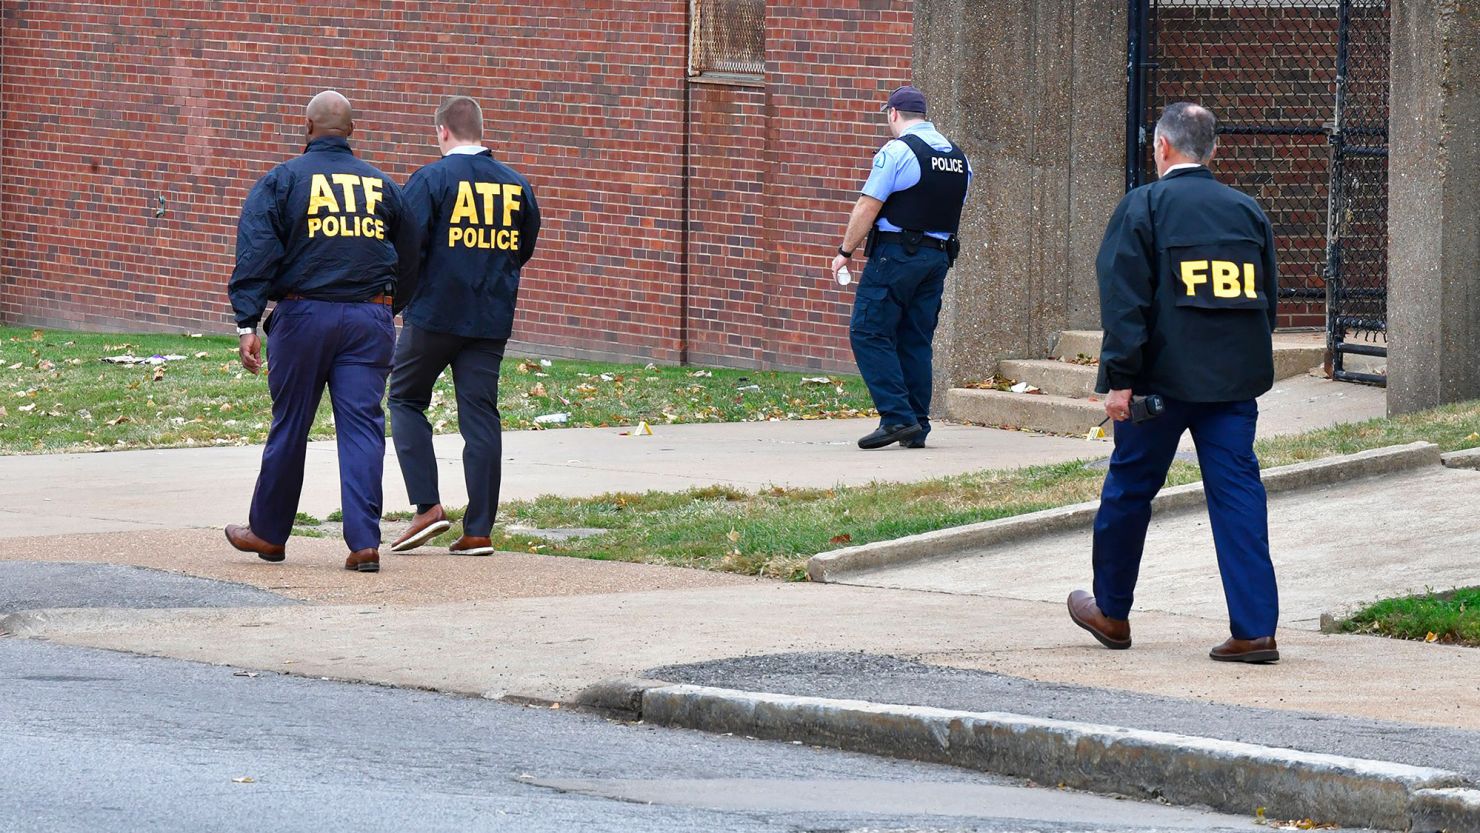 Alcohol, Tobacco, & Firearms agents alongside an FBI agent and a St. Louis metropolitan police officer.